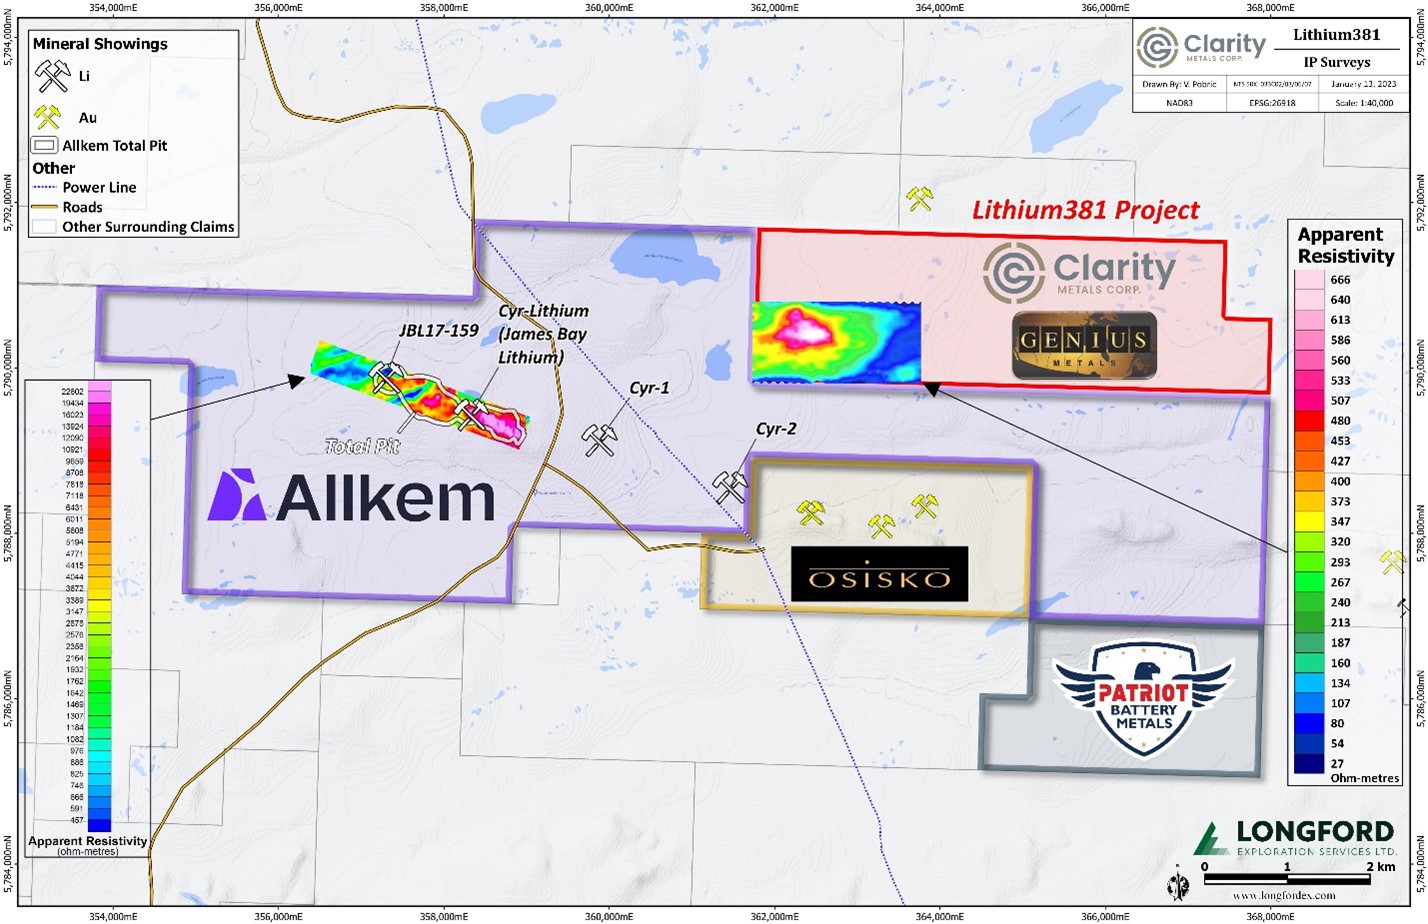 clarity 1 Clarity Reports Positive Preliminary Results and Indentifies Target on Lithium381 Project